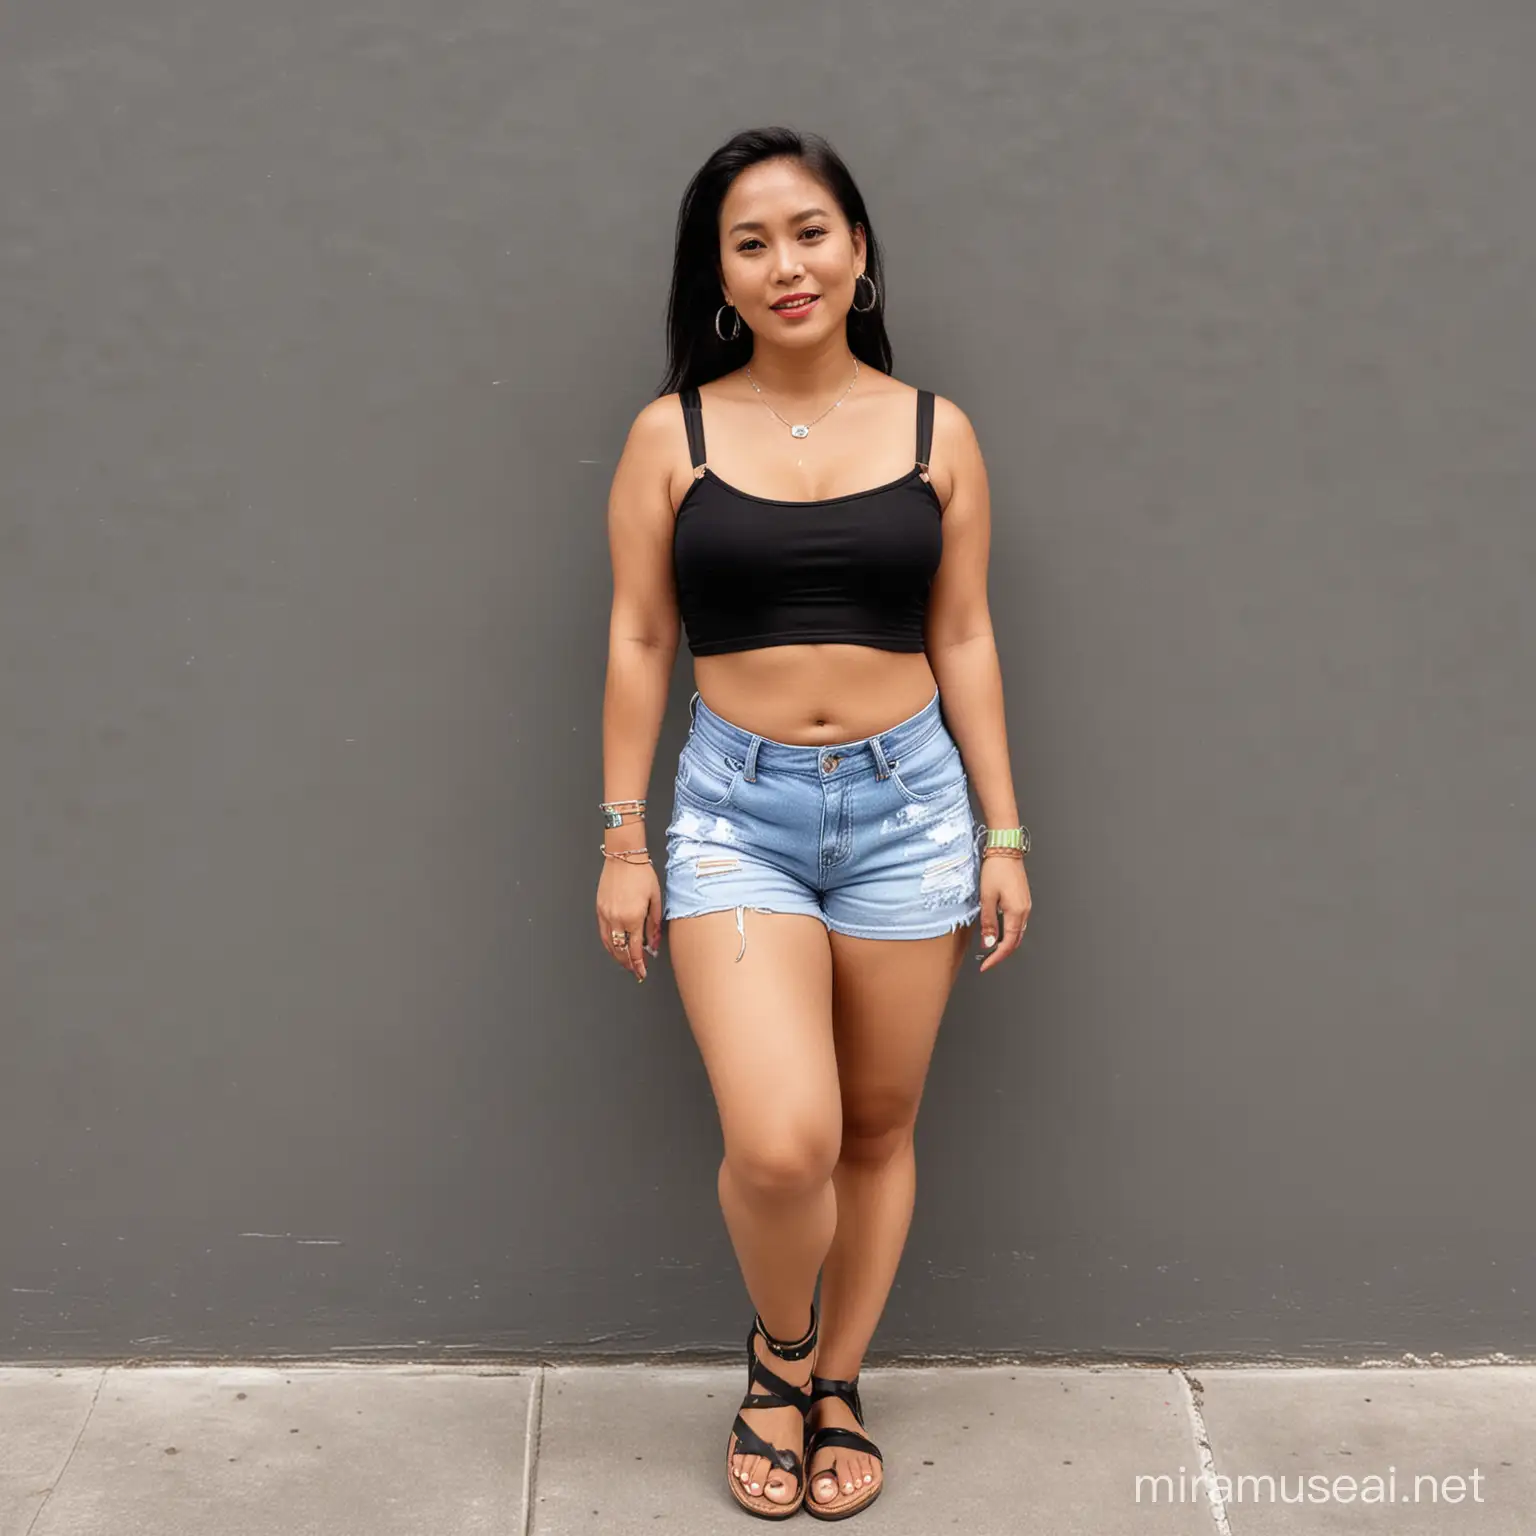 Filipina middle aged woman, wearing crop yop and shorts with sandals, thick thighs, navel piercings